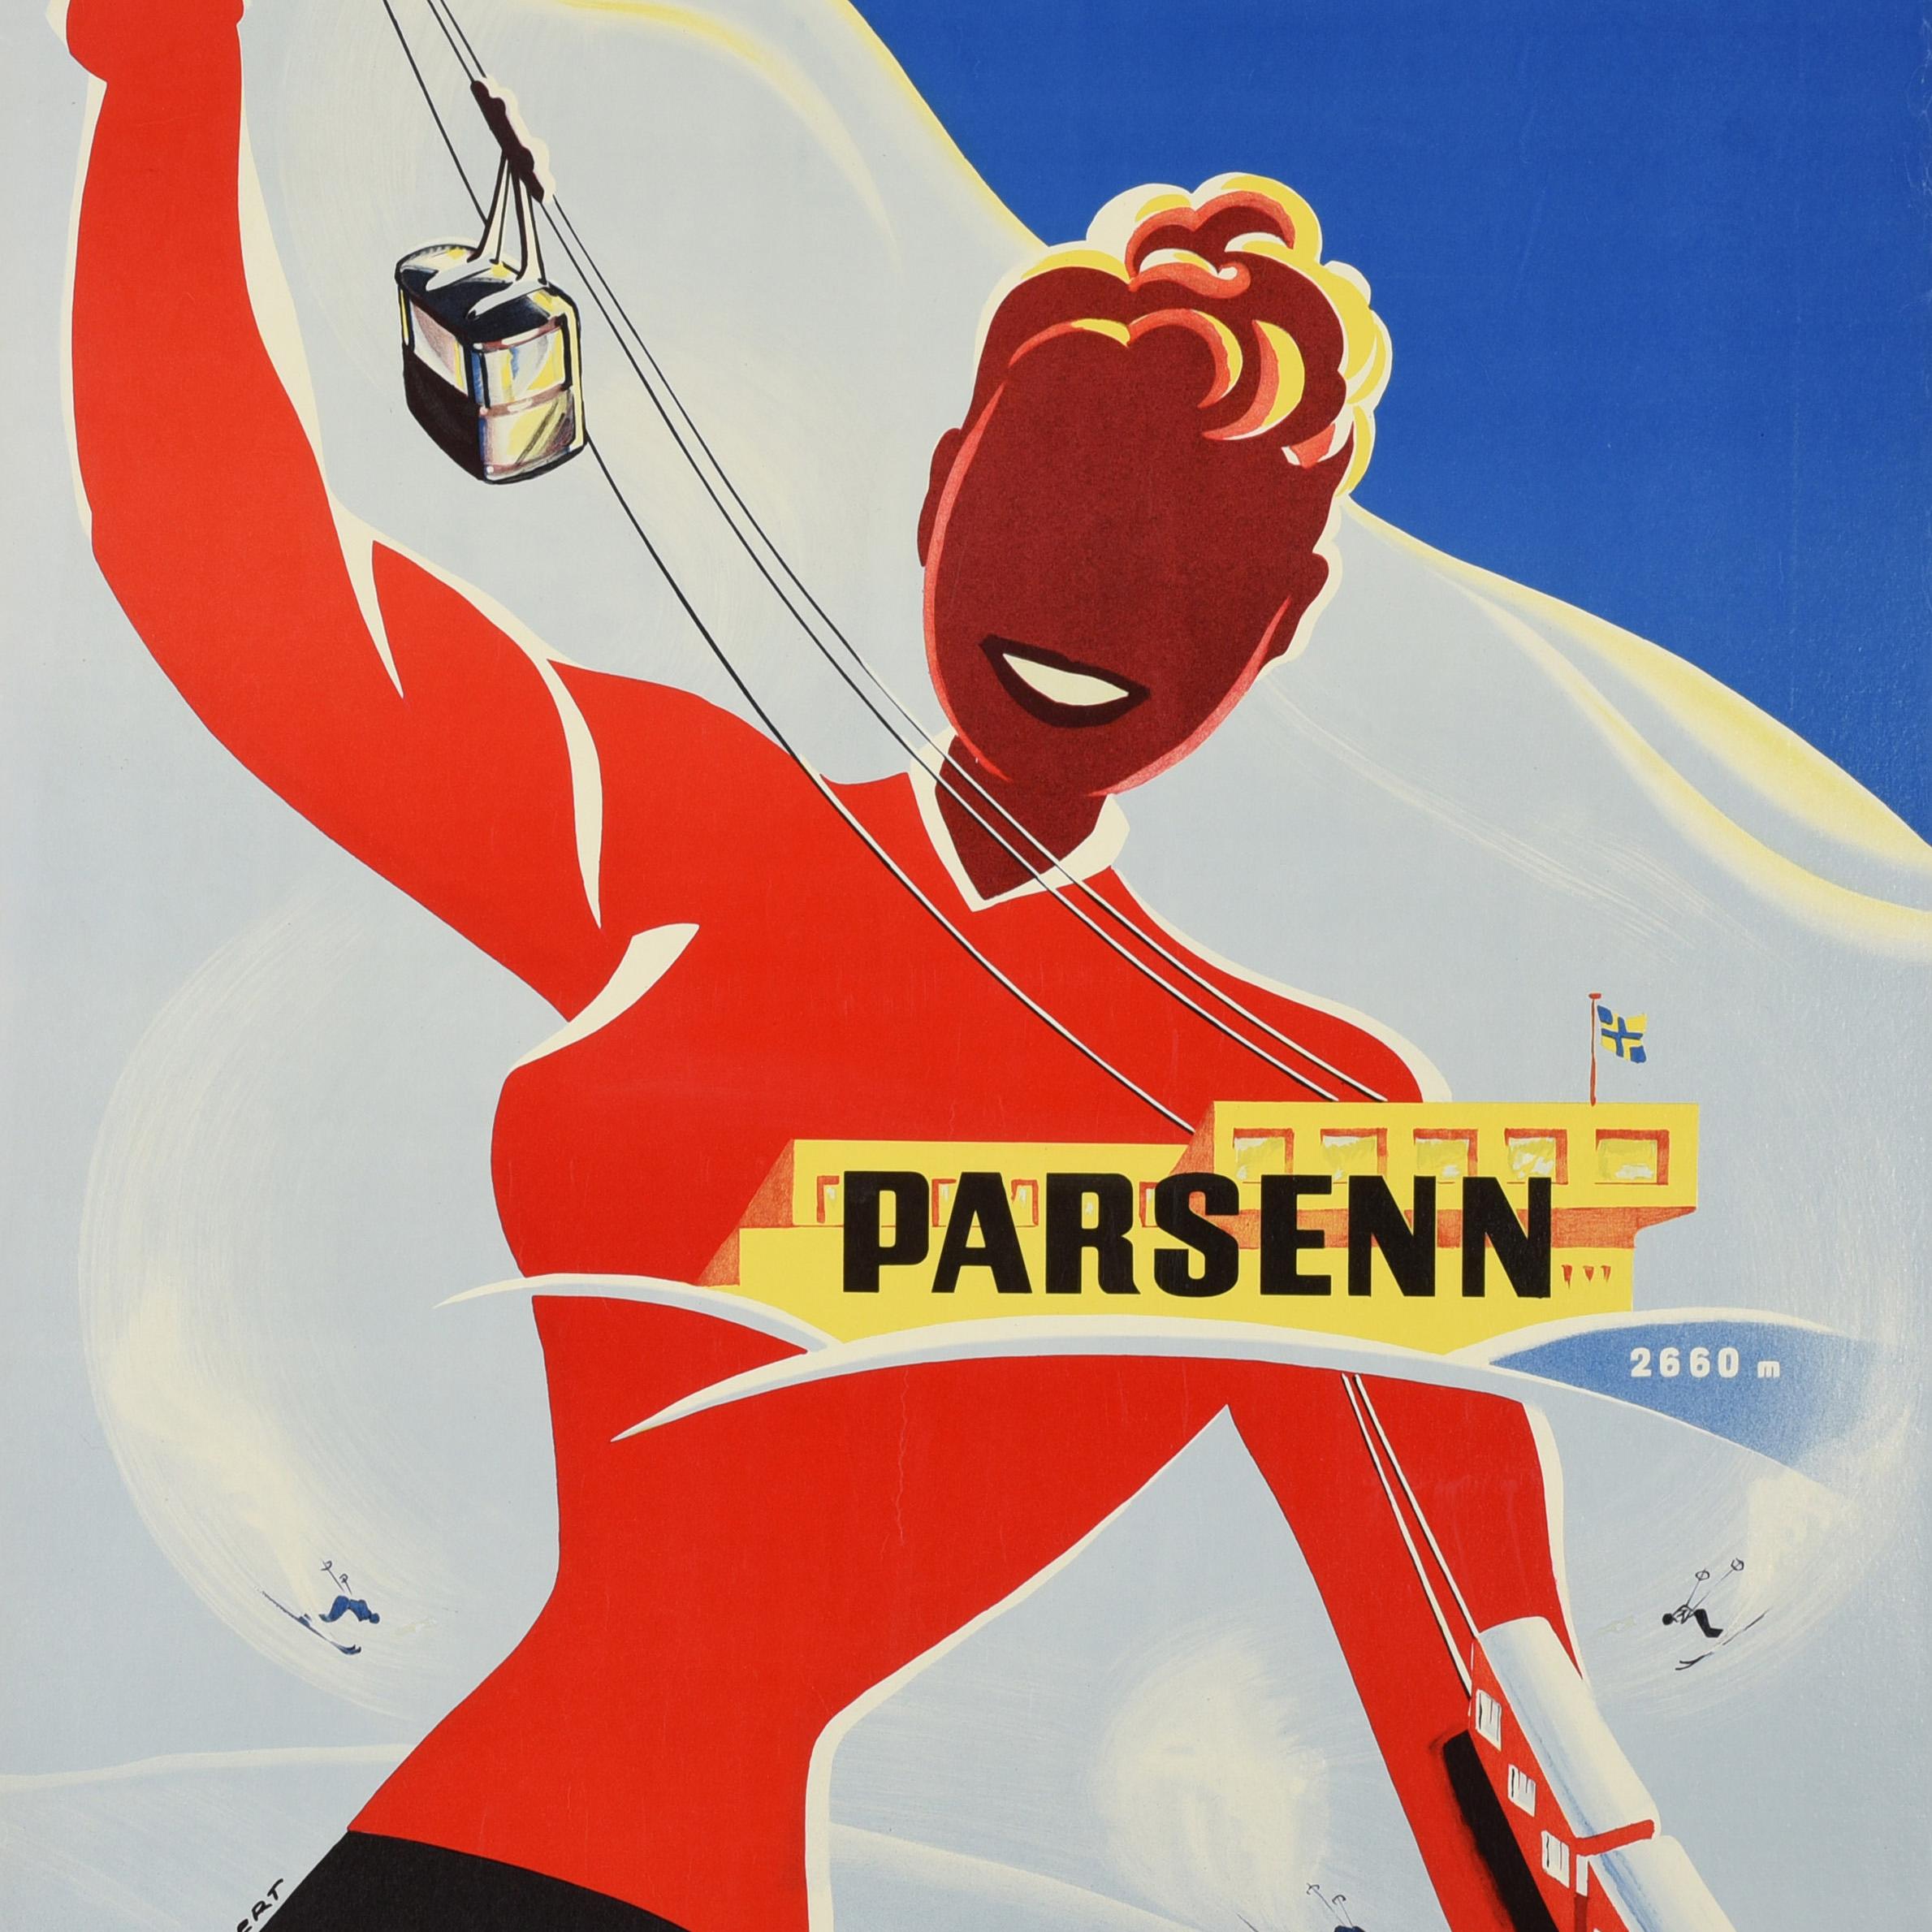 Original vintage ski resort poster for Davos - Weissfluh 2820m Parsenn 2660m Davos 1560m Schweiz Suisse Switzerland. Colourful image of a smiling lady wearing a red top holding the top of a cable car in one hand with a red funicular railway train